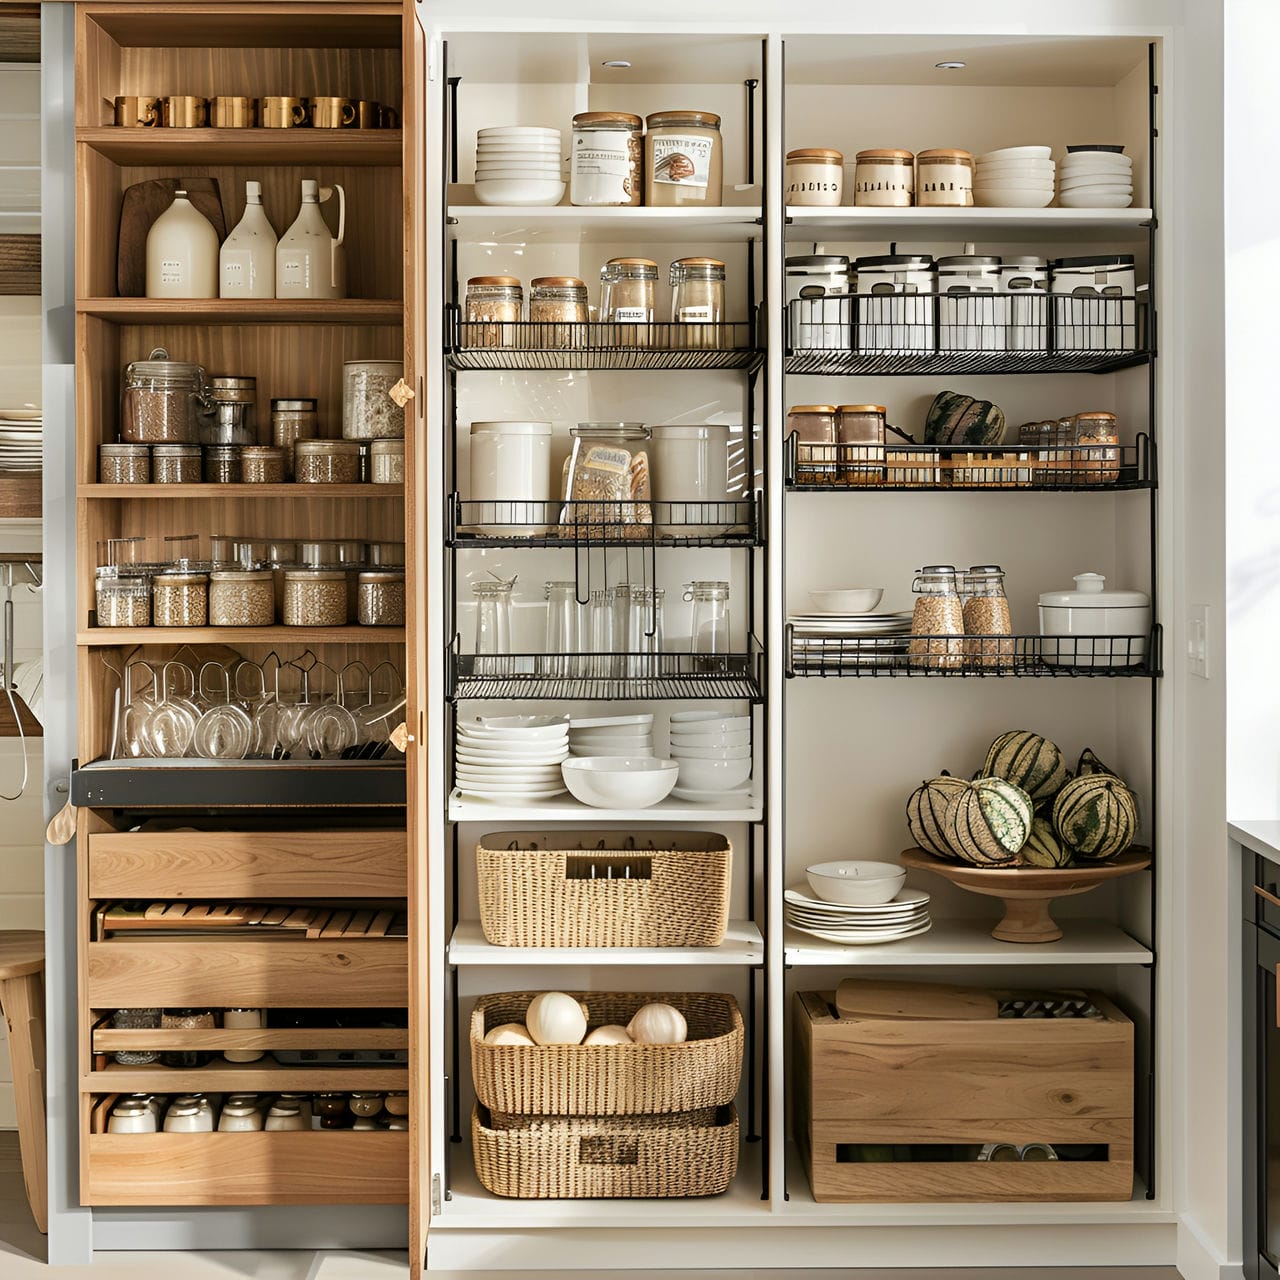 Larder: size, functionality, uses, furniture and renovation